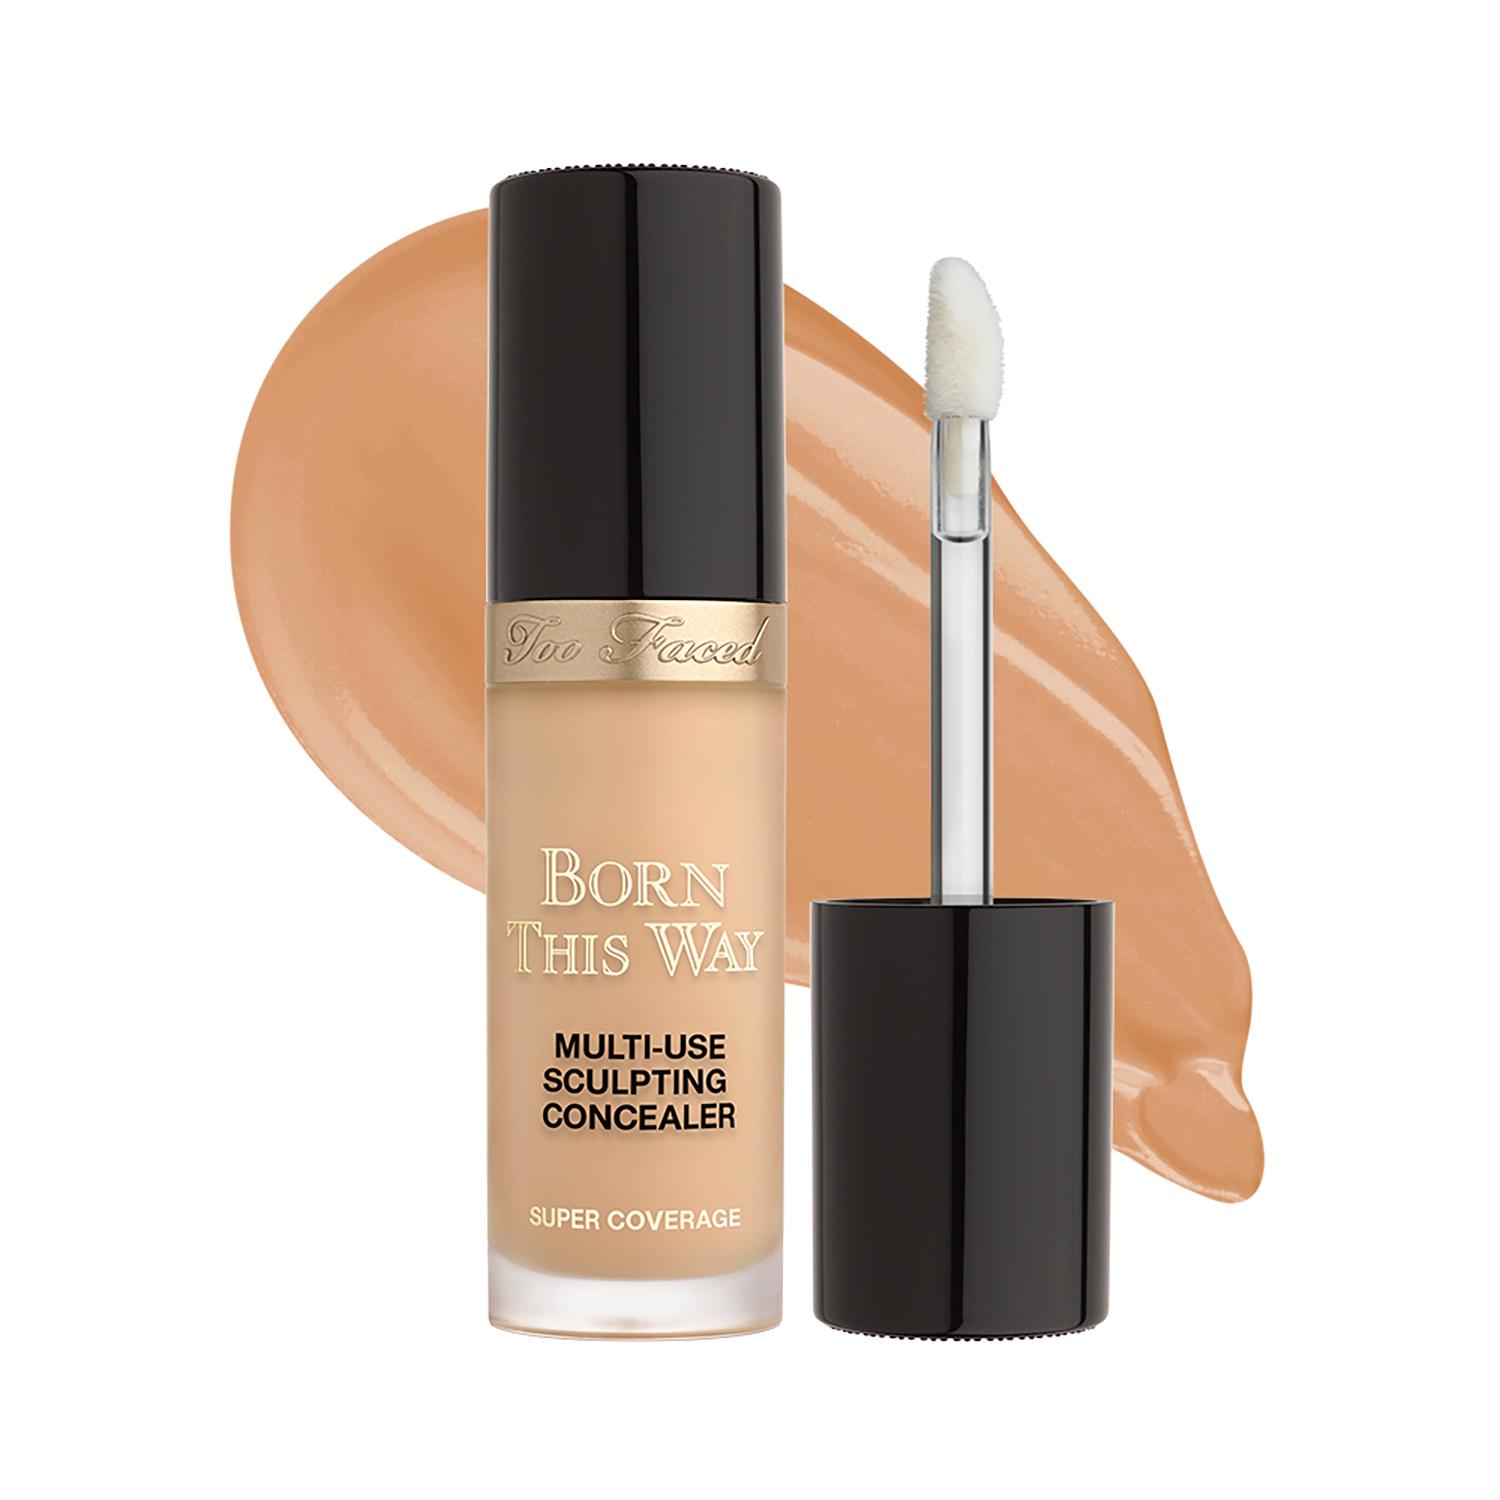 Too Faced | Too Faced Born This Way Super Coverage Multi Use Sculpting Concealer- Warm Beige (13.5ml)